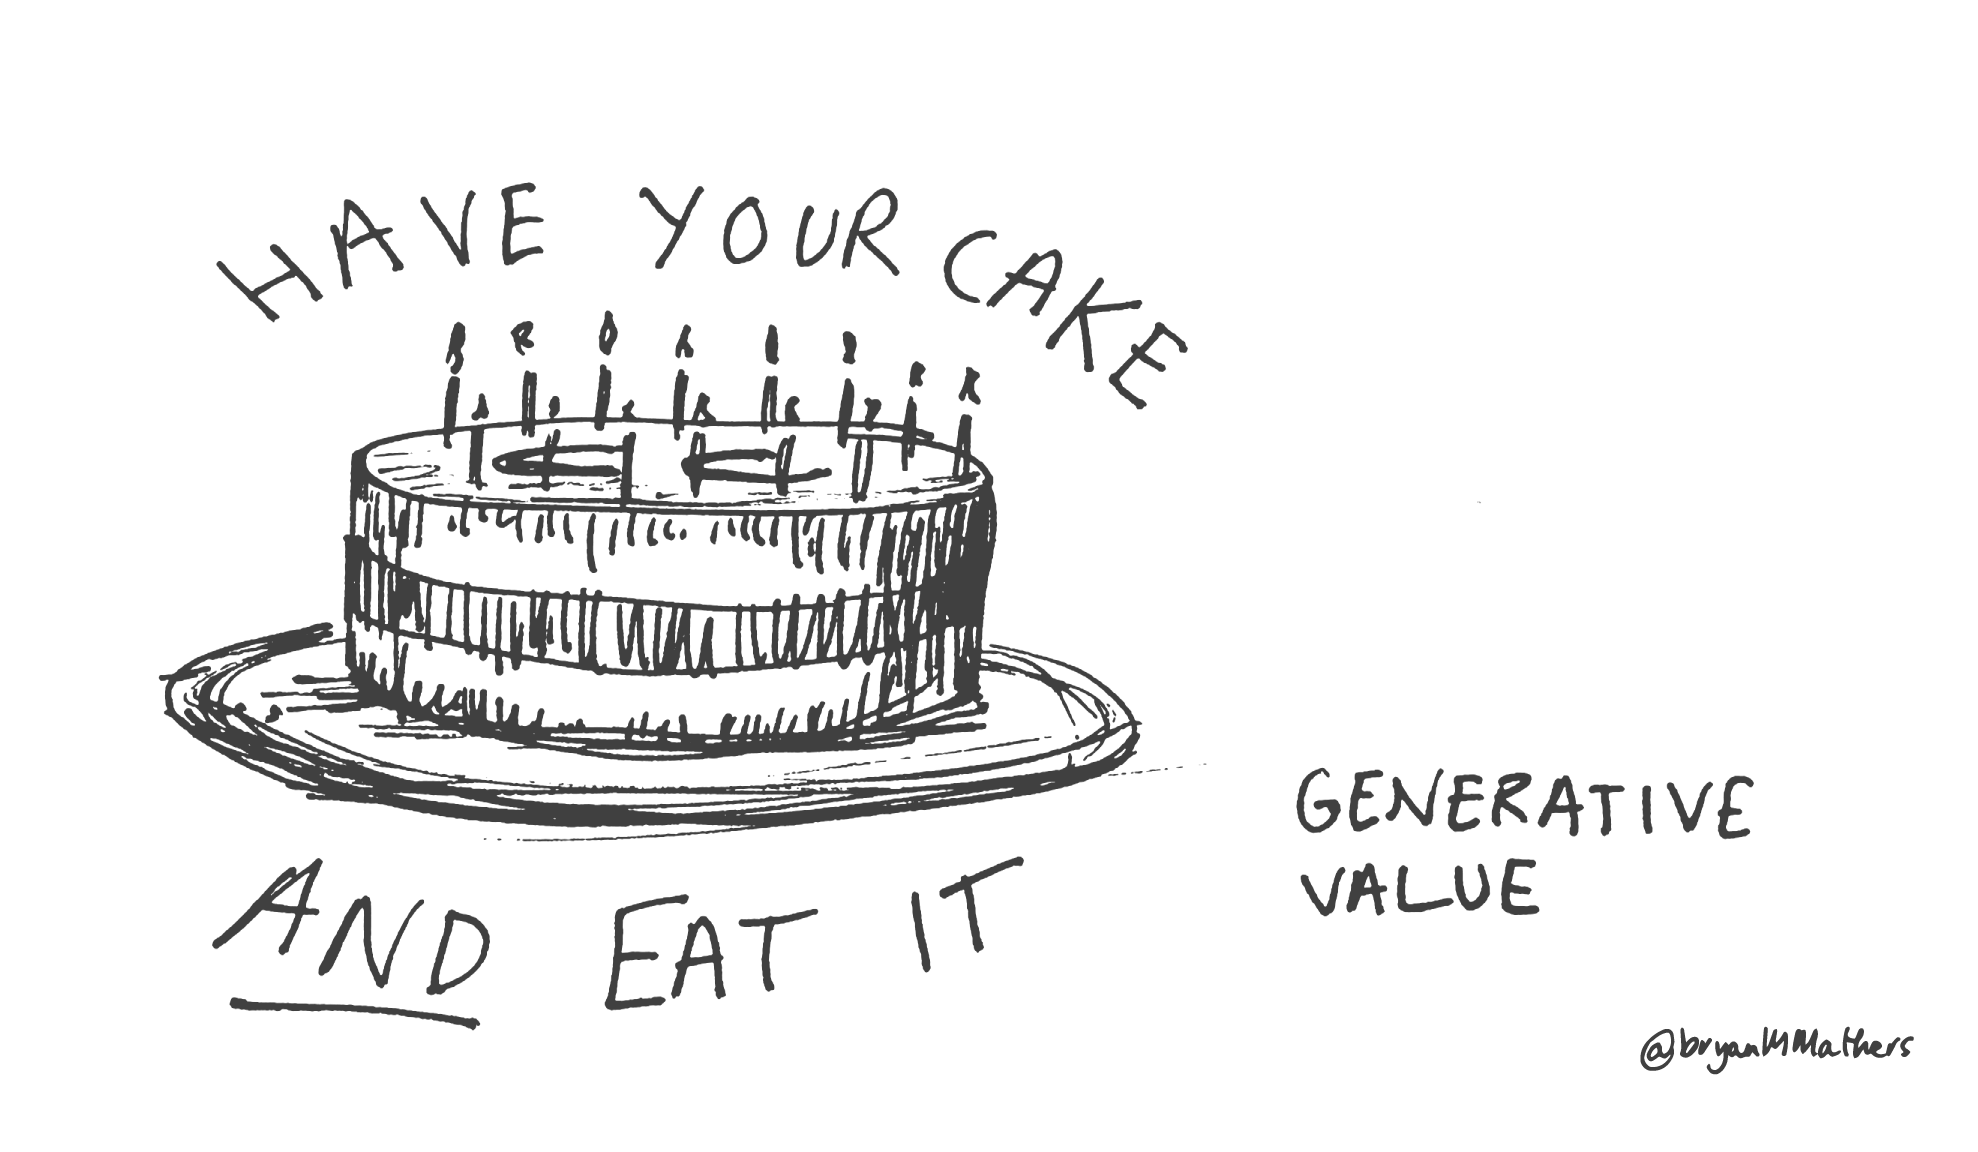 Have your cake and eat it